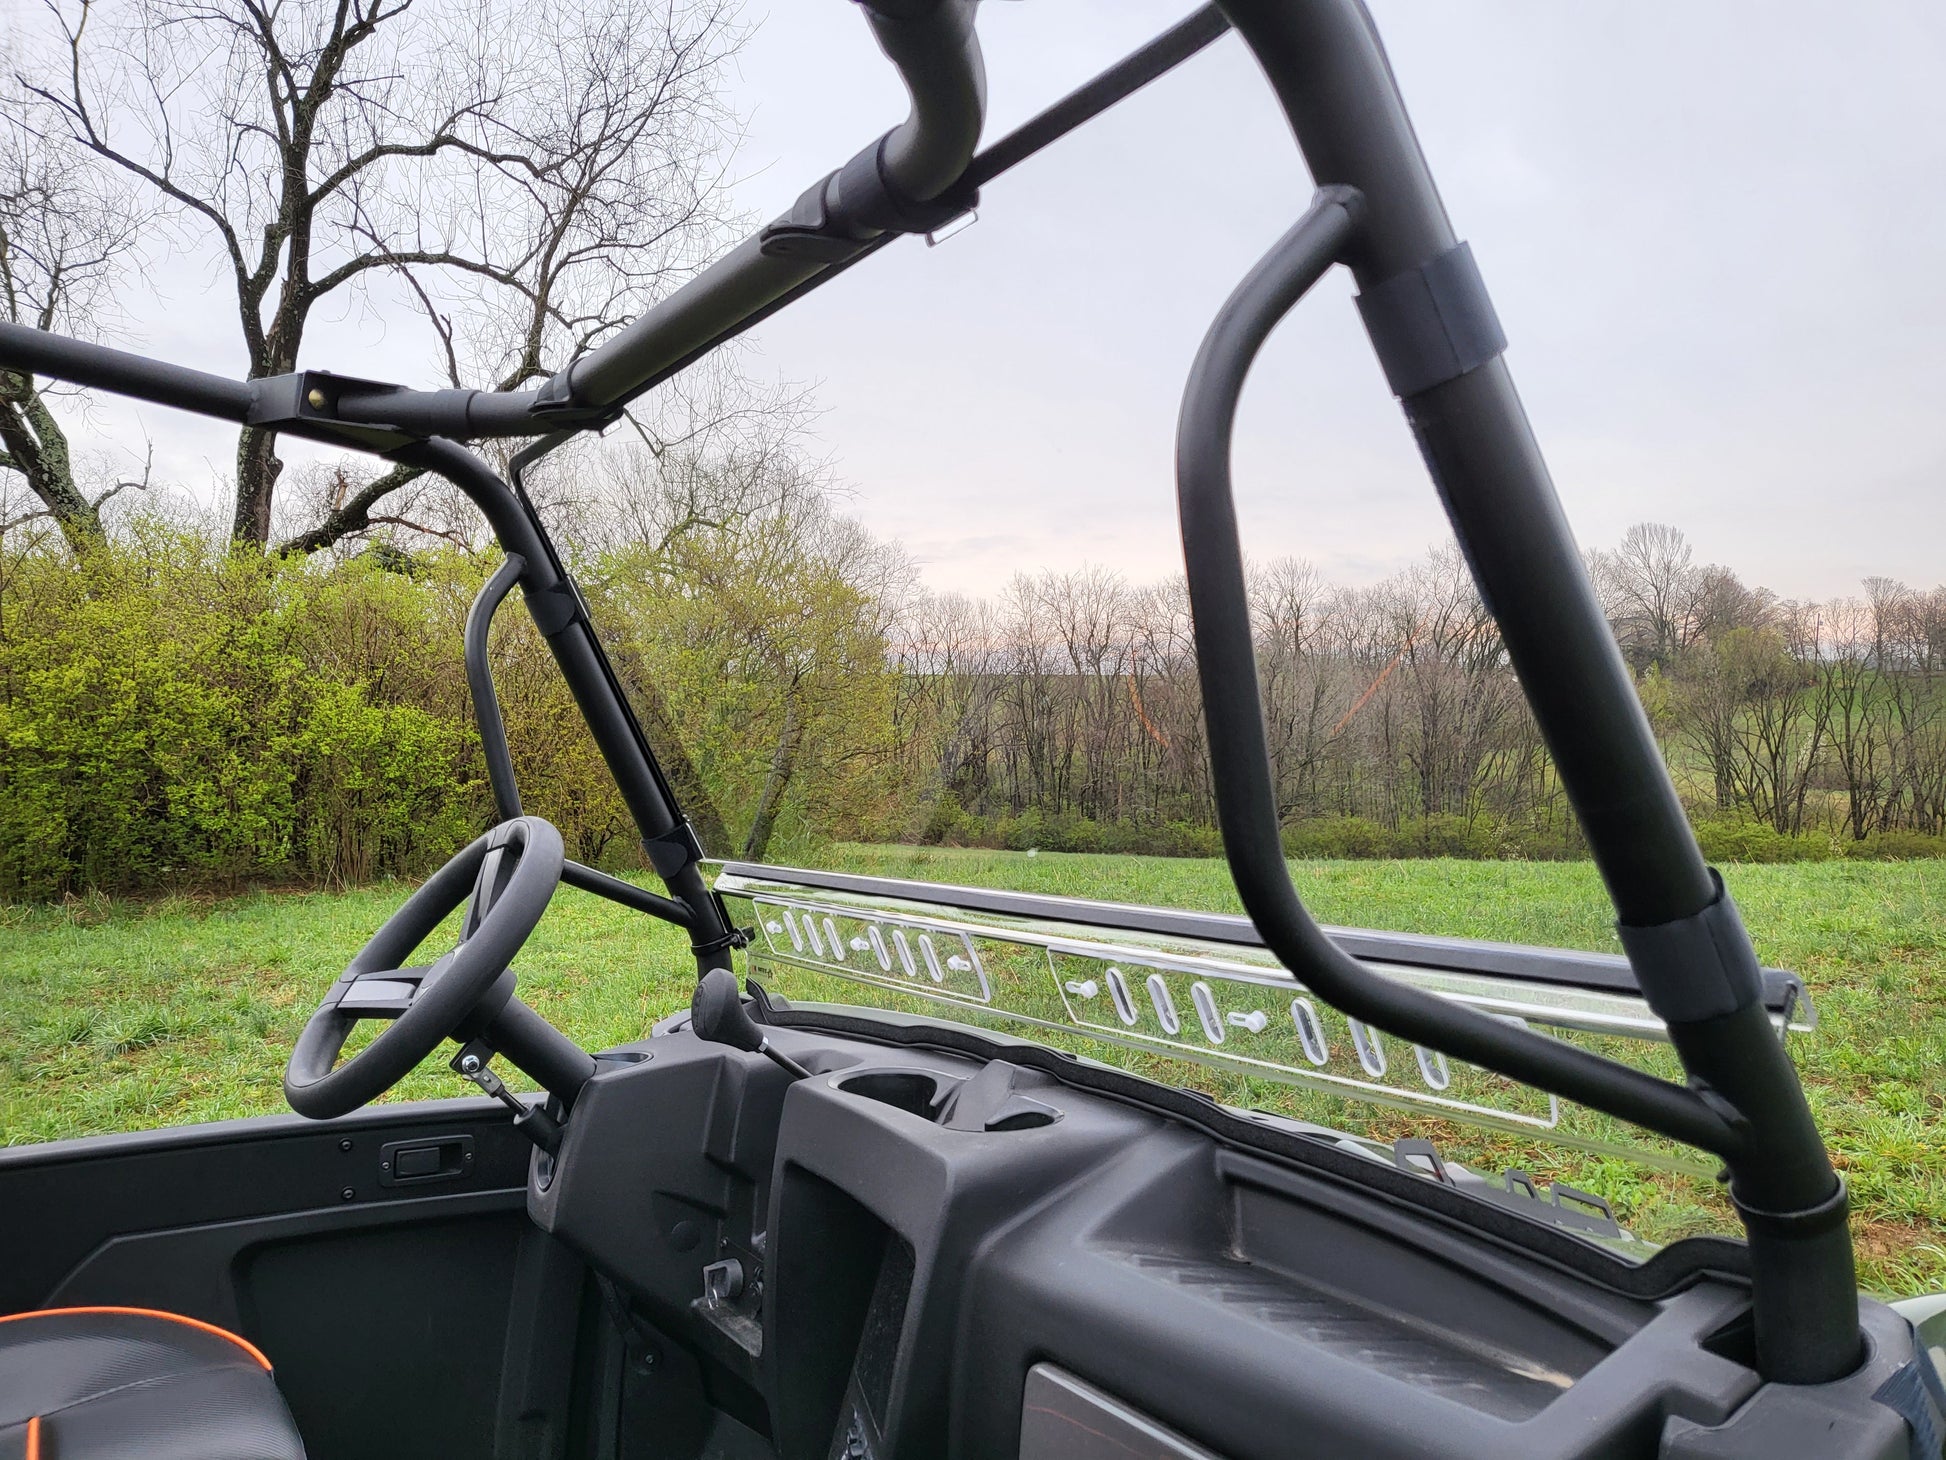 Intimidator GC1K 6-Seater - 2 Pc Windshield with Vent, Clamp, and Hard Coat Options - 3 Star UTV